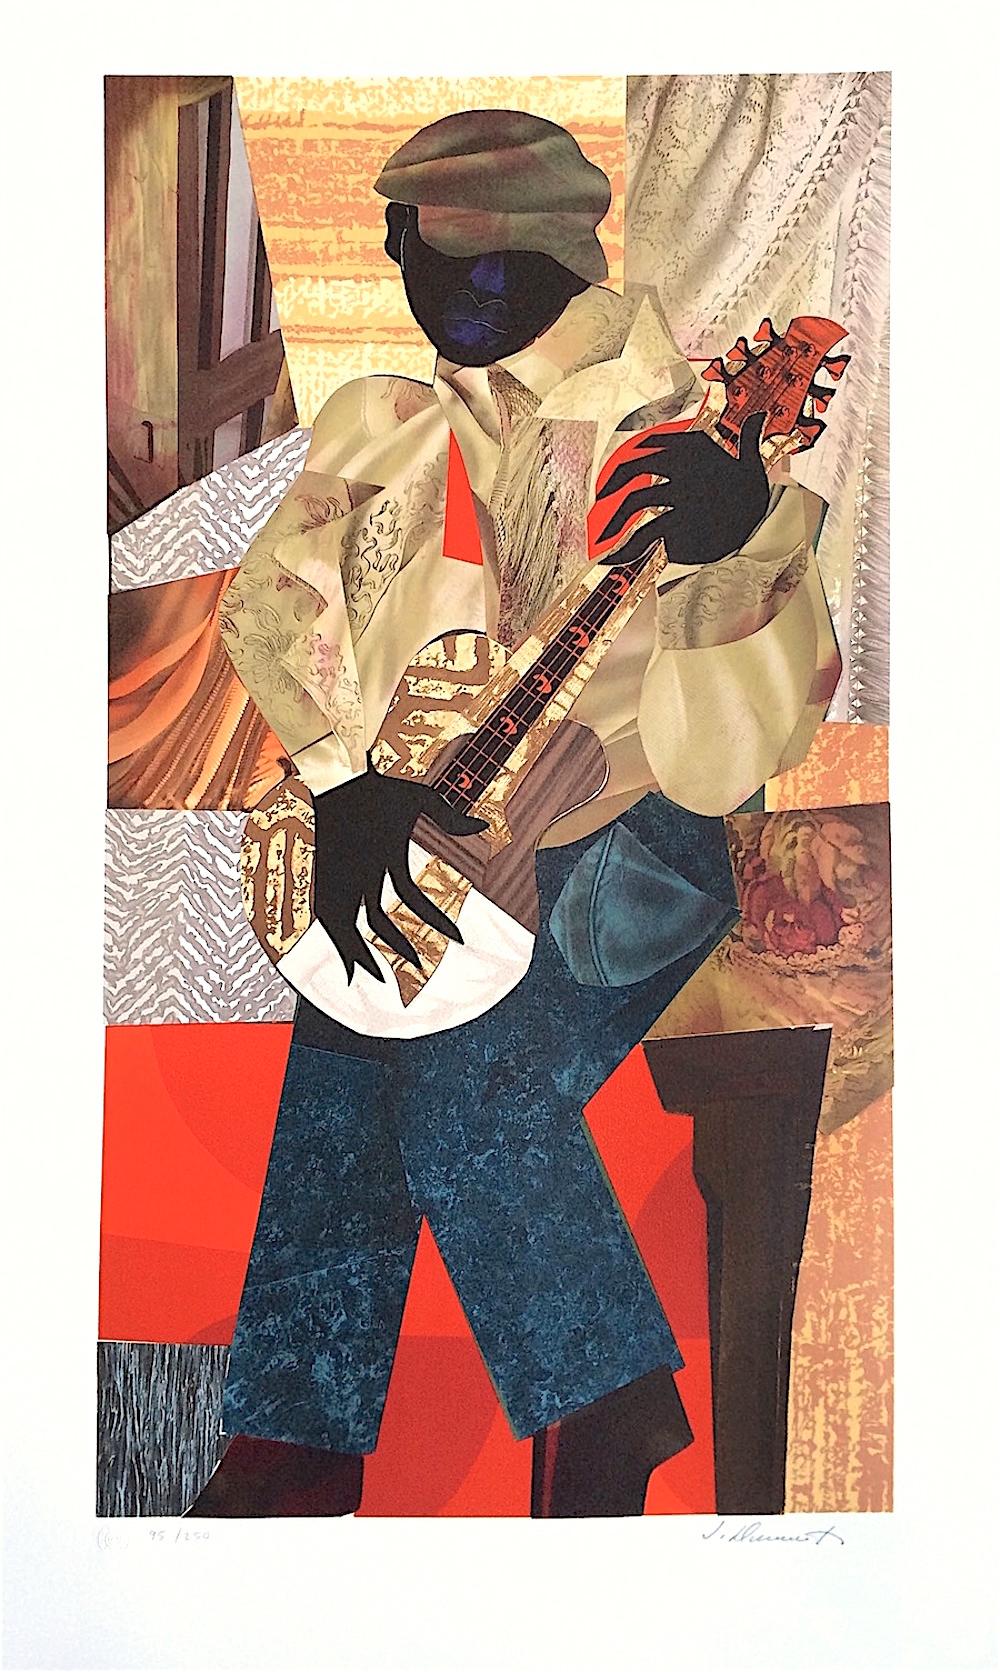 HONKY TONK Signed Lithograph, Collage Portrait Black Man, Guitar, Music - Contemporary Print by James Demark